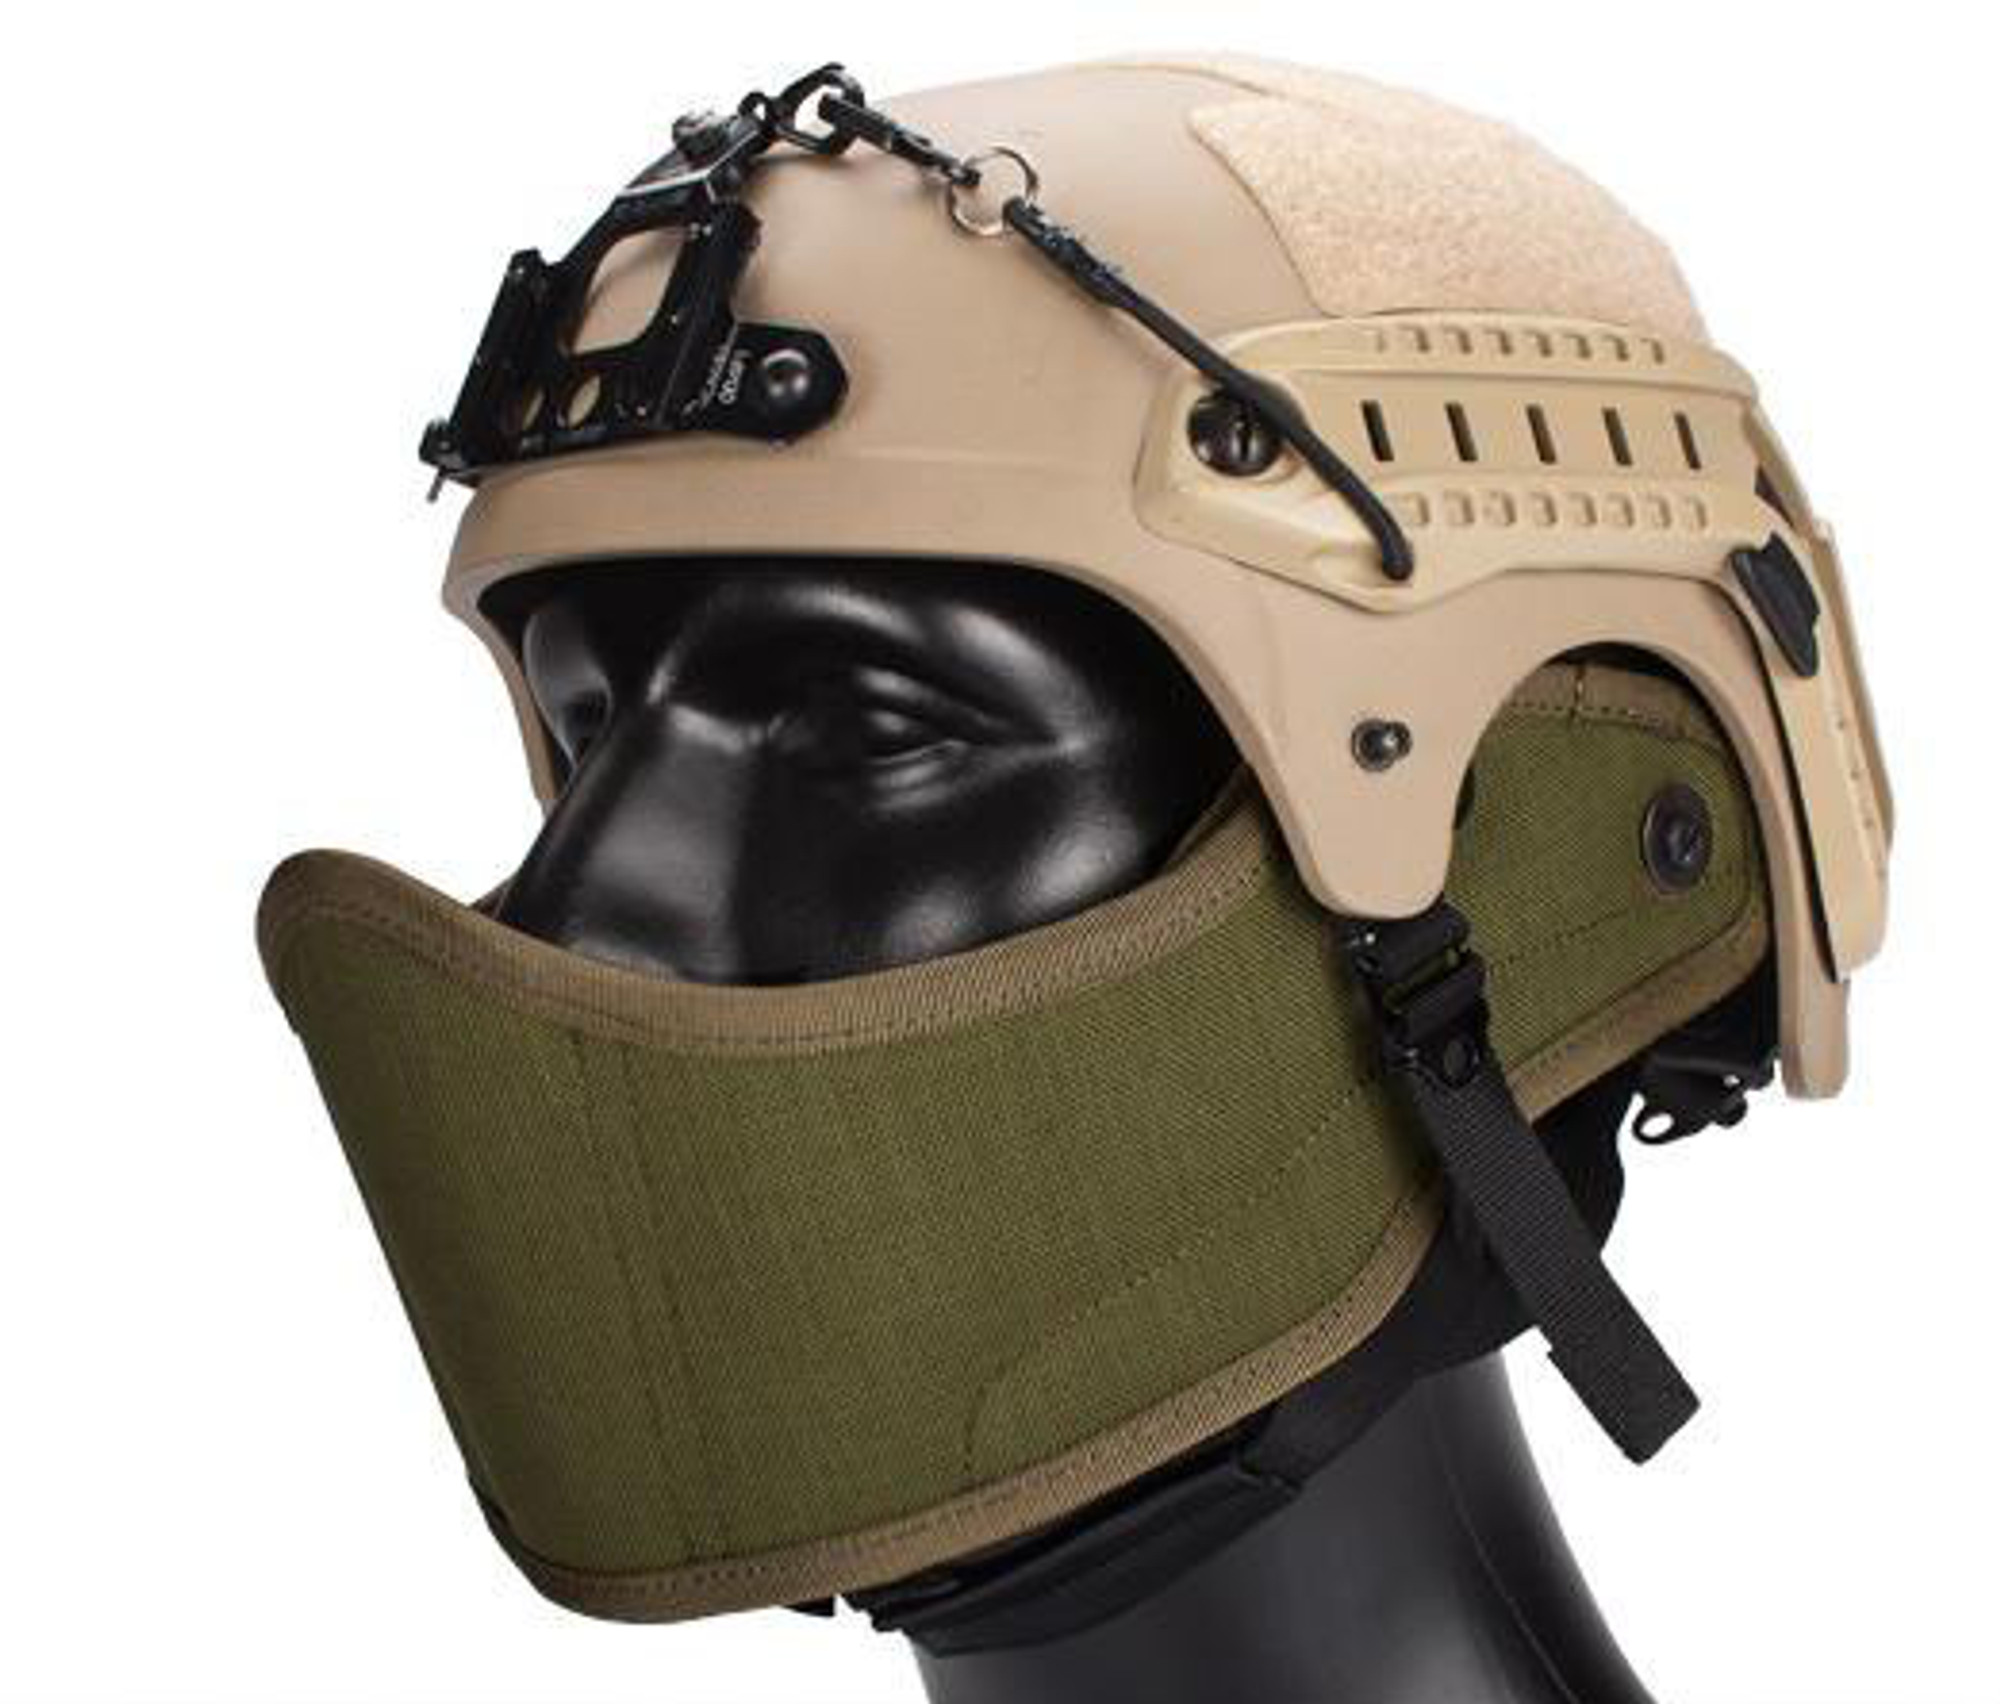 Avengers Helmet Face Armour HAF Mask for Airsoft (Color: Coyote Brown)